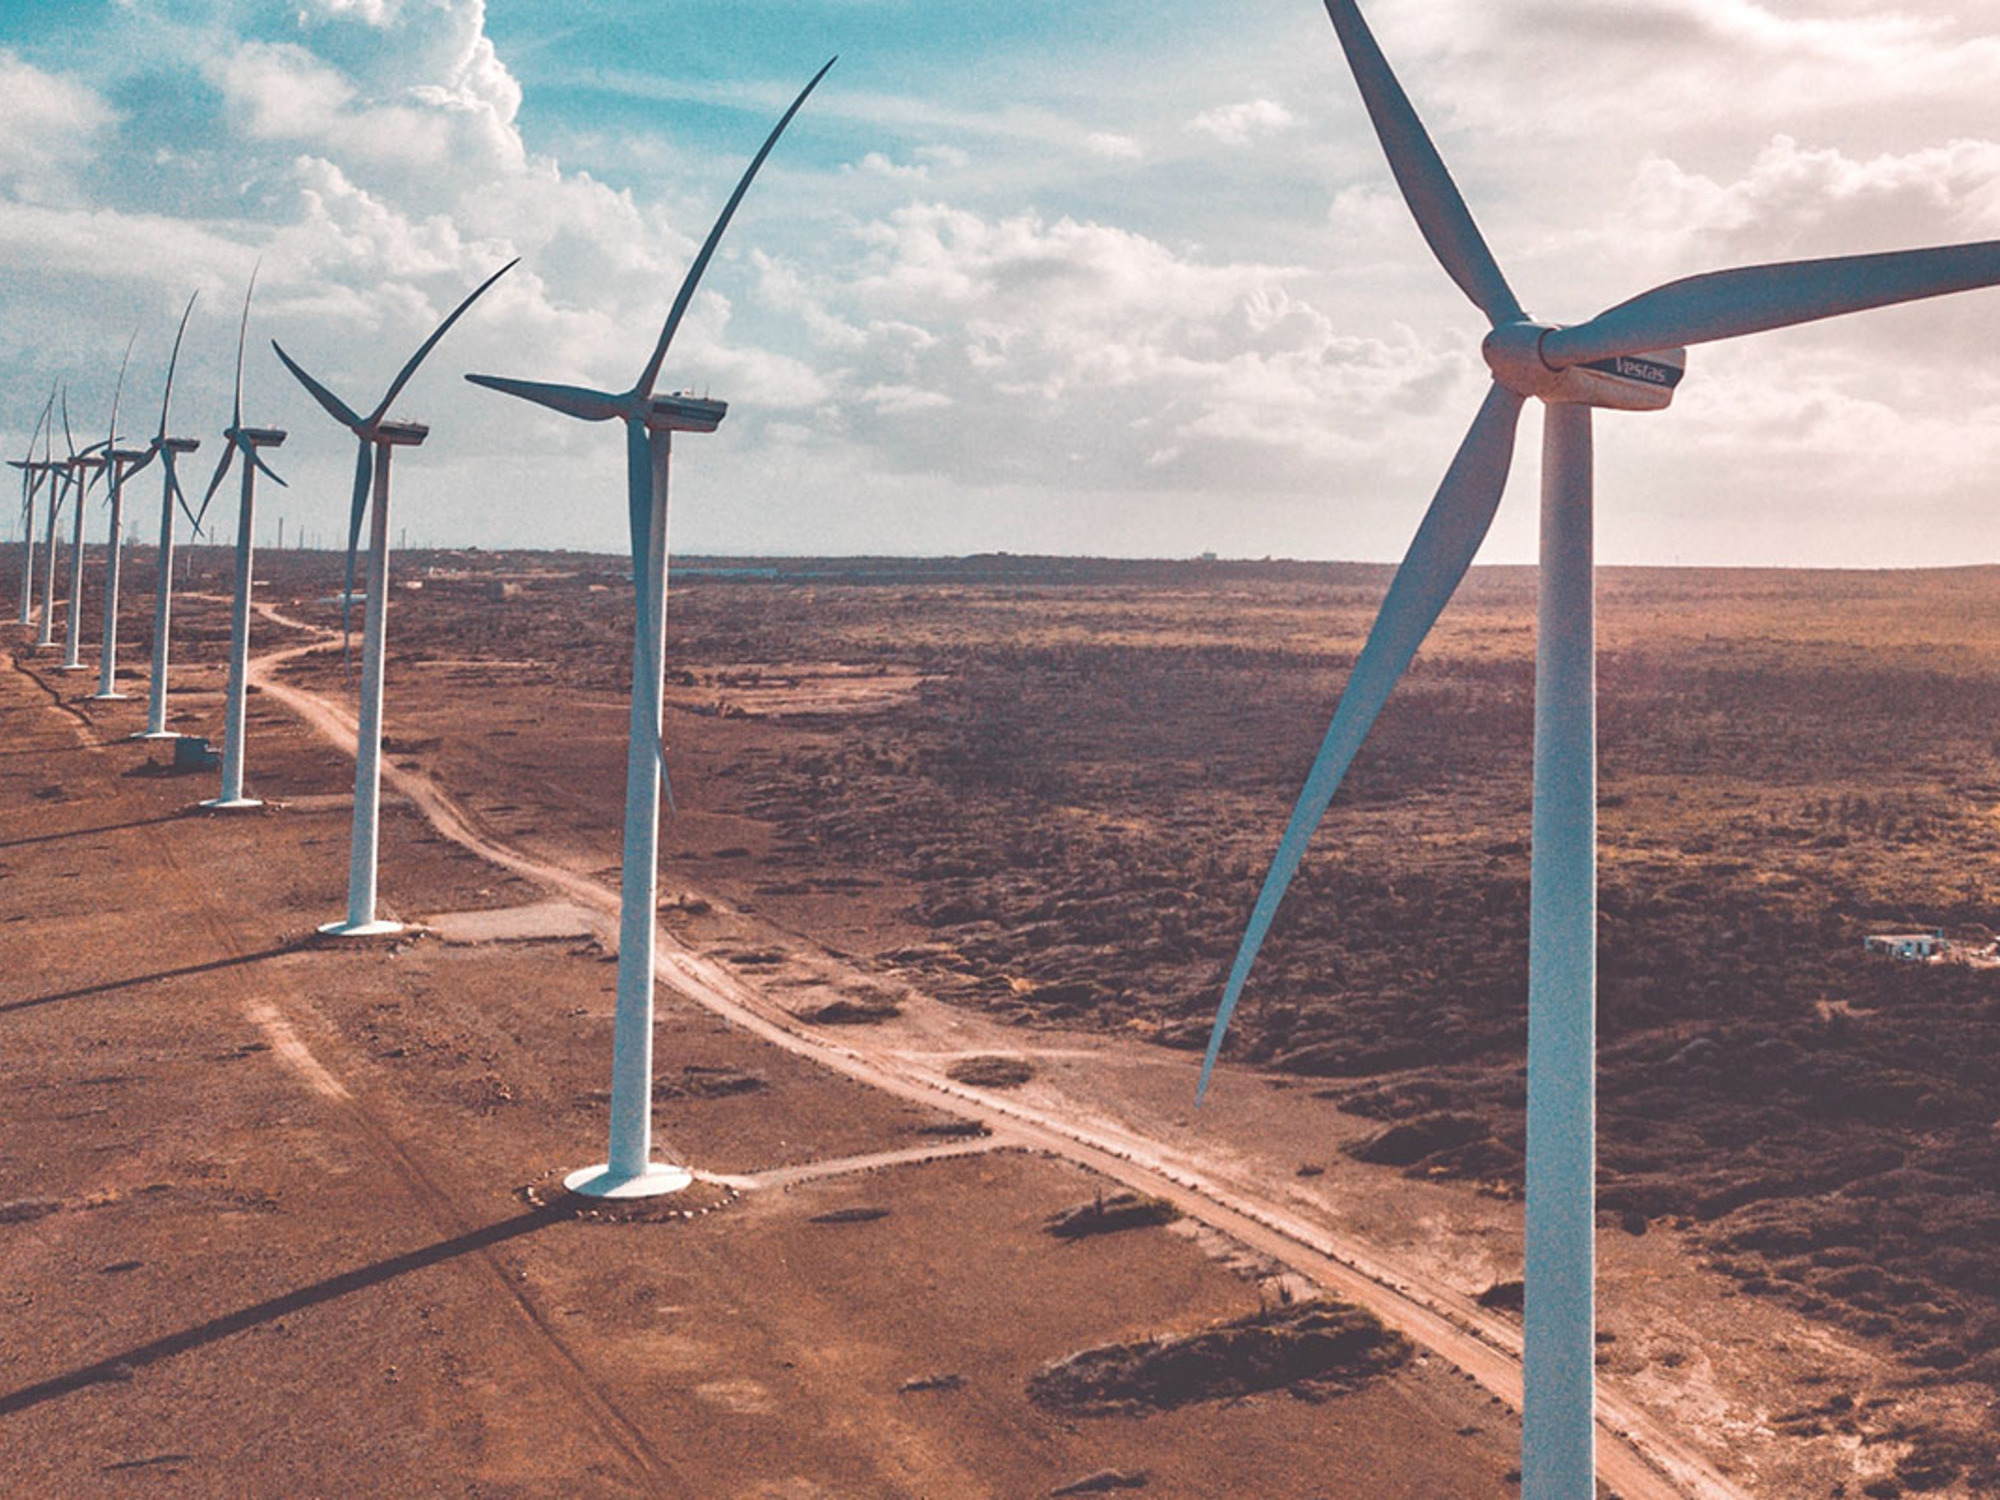 Access 12 courses on renewable engineering for only $39.99